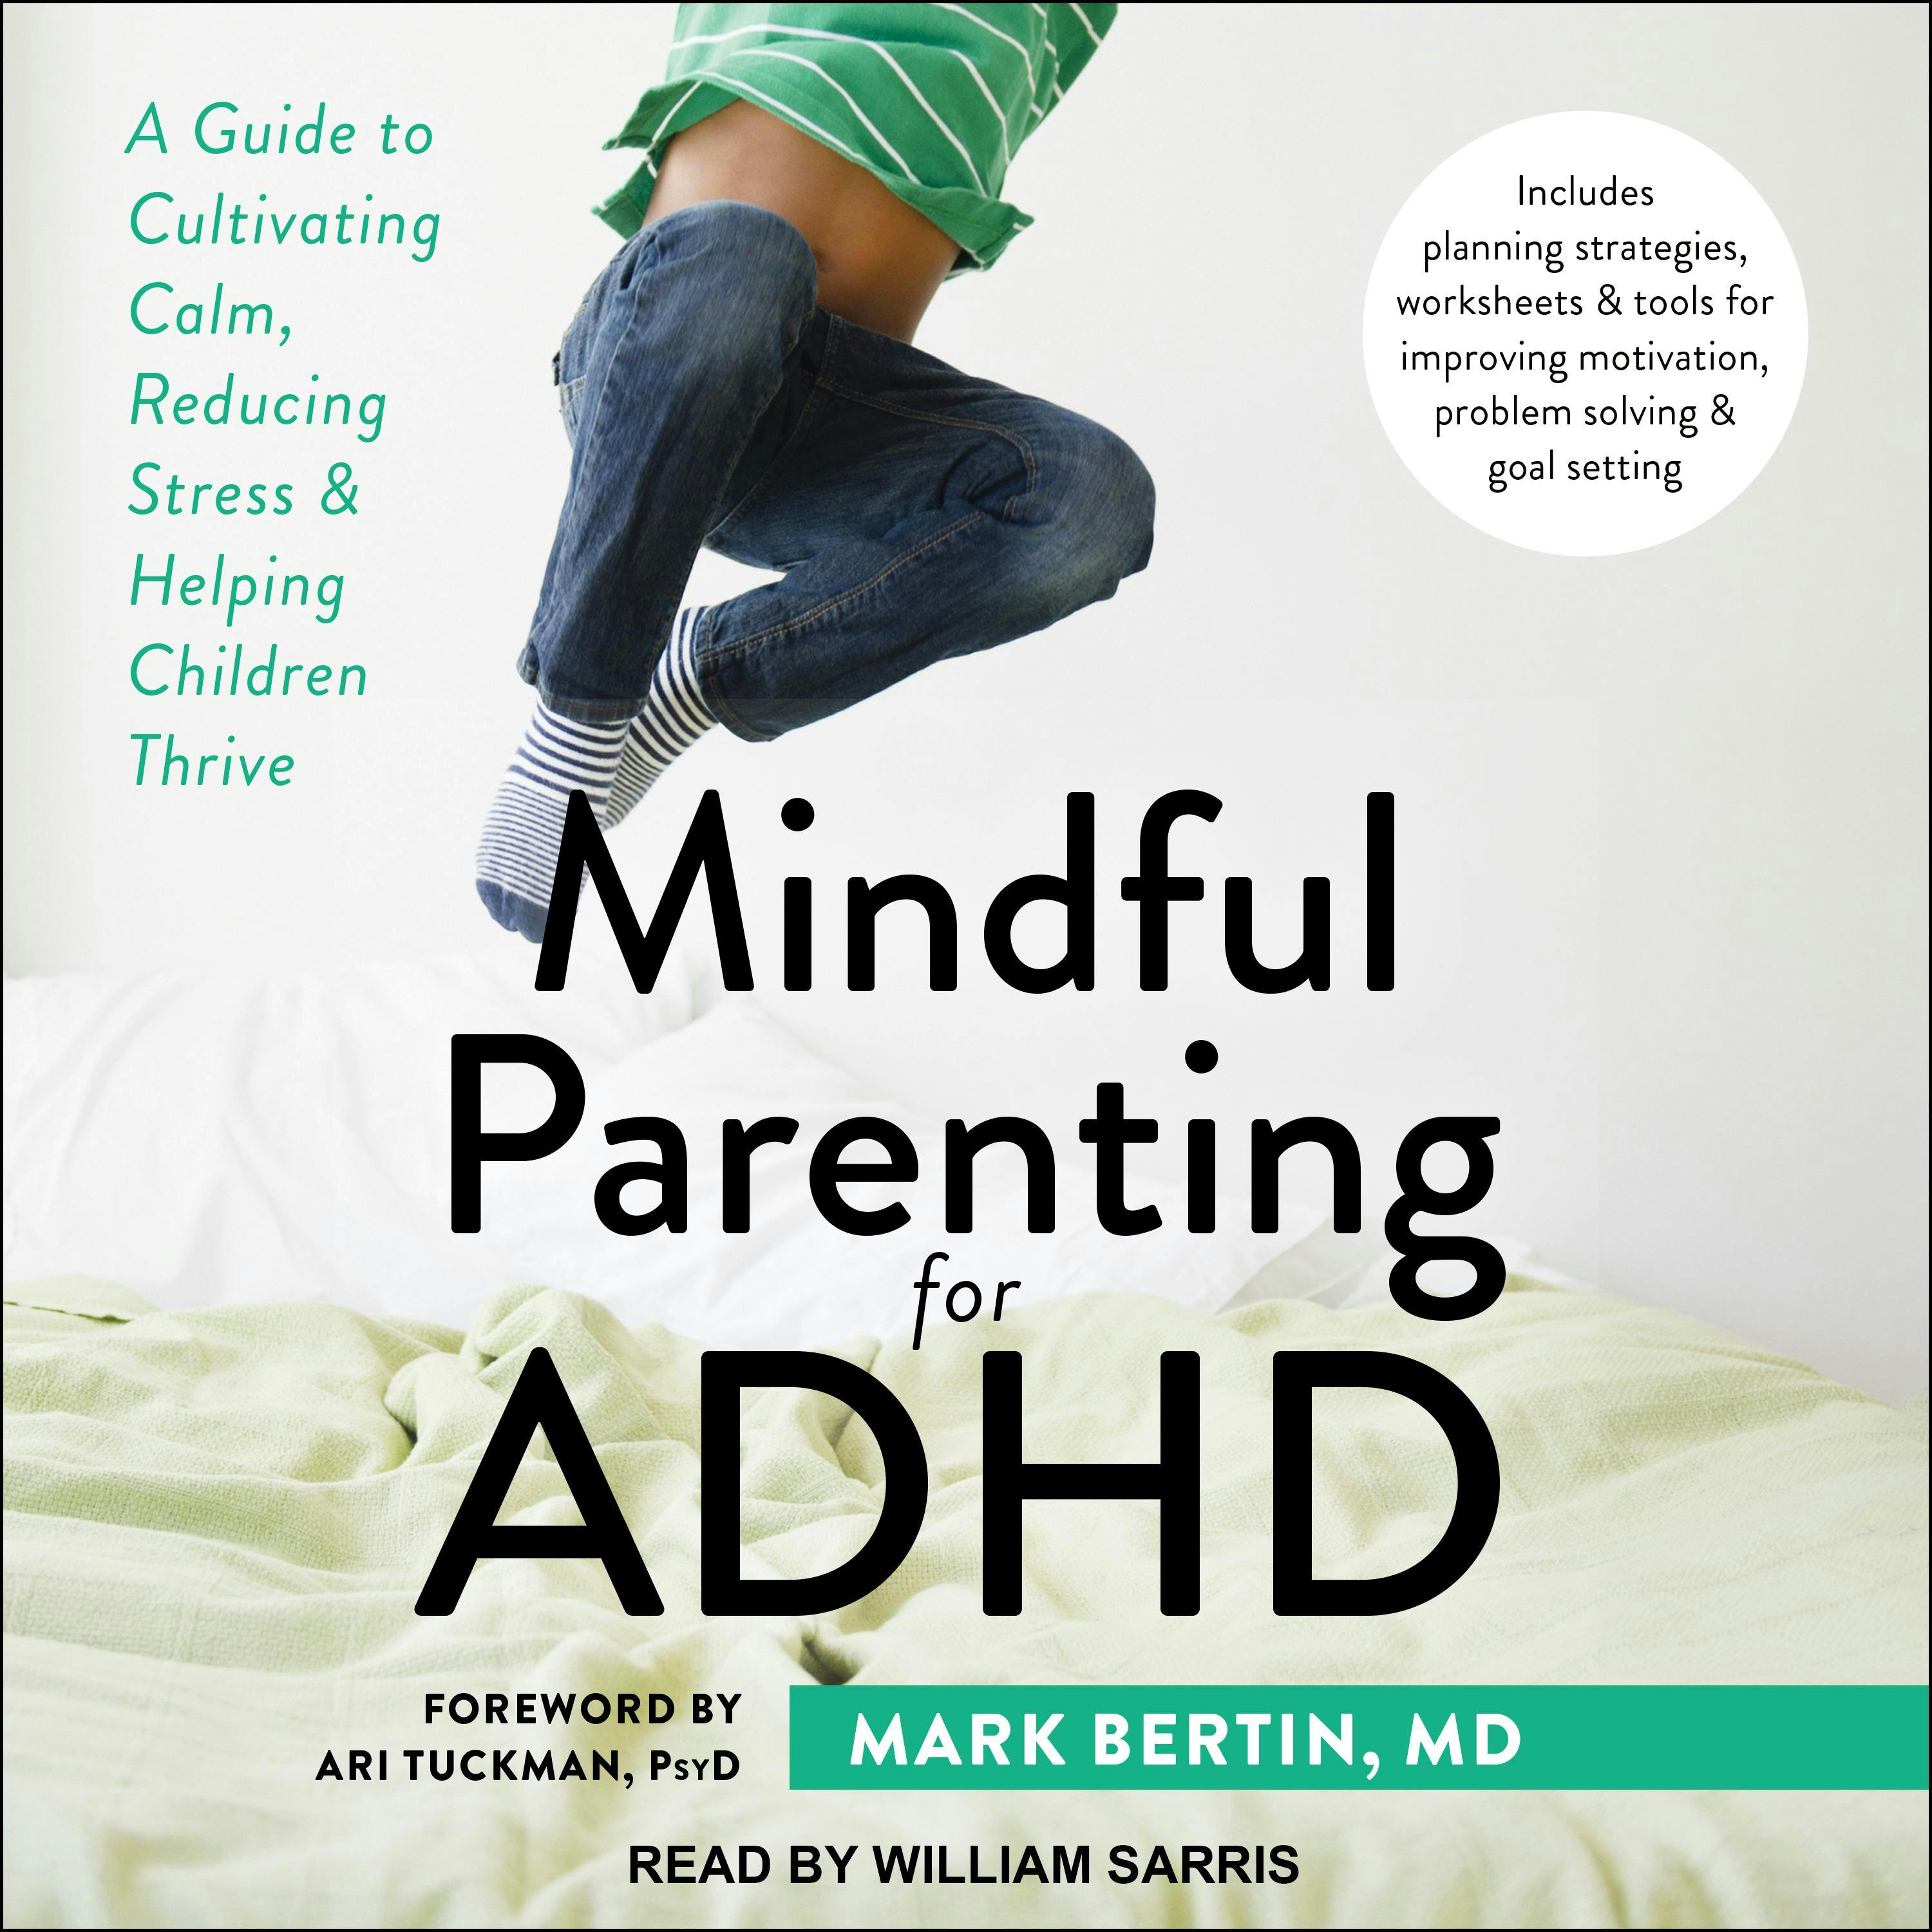 Mindful Parenting for ADHD: A Guide to Cultivating Calm, Reducing Stress, and Helping Children Thrive - PsyD Ari Tuckman, MD